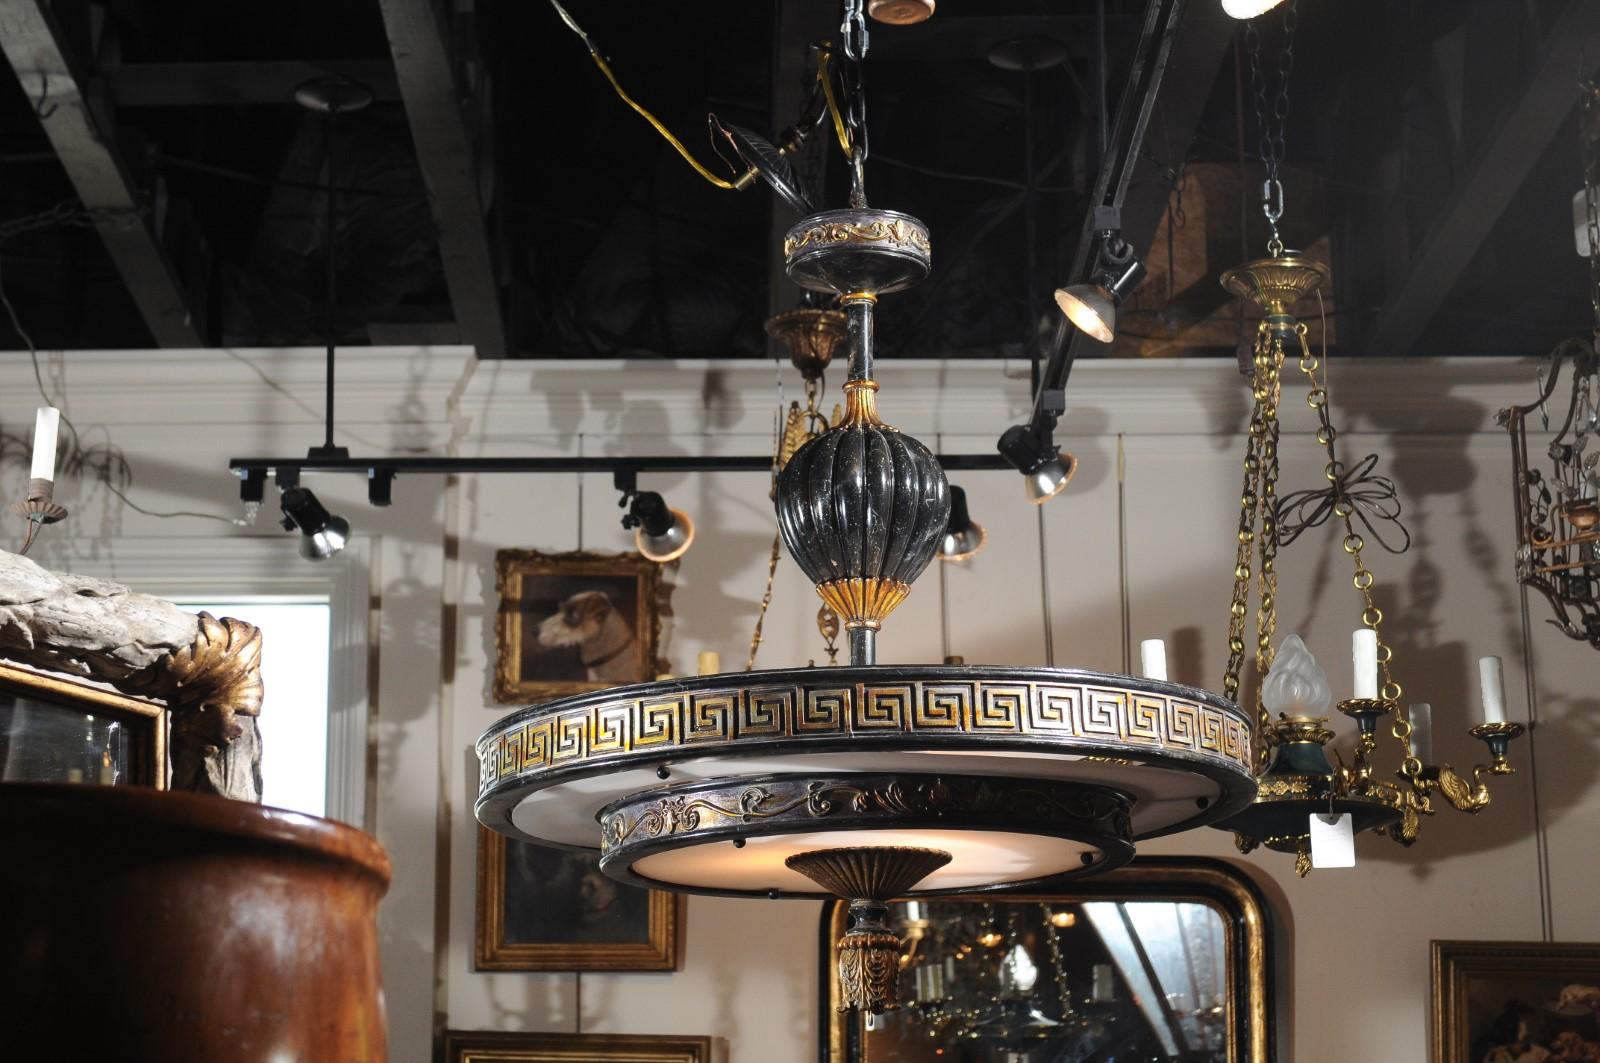 An Italian vintage carved wood parcel-gilt circular chandelier from the mid-20th century, with Greek key frieze and scrollwork motifs. Born in Italy during the midcentury period, this exquisite circular chandelier attracts all of our attention with